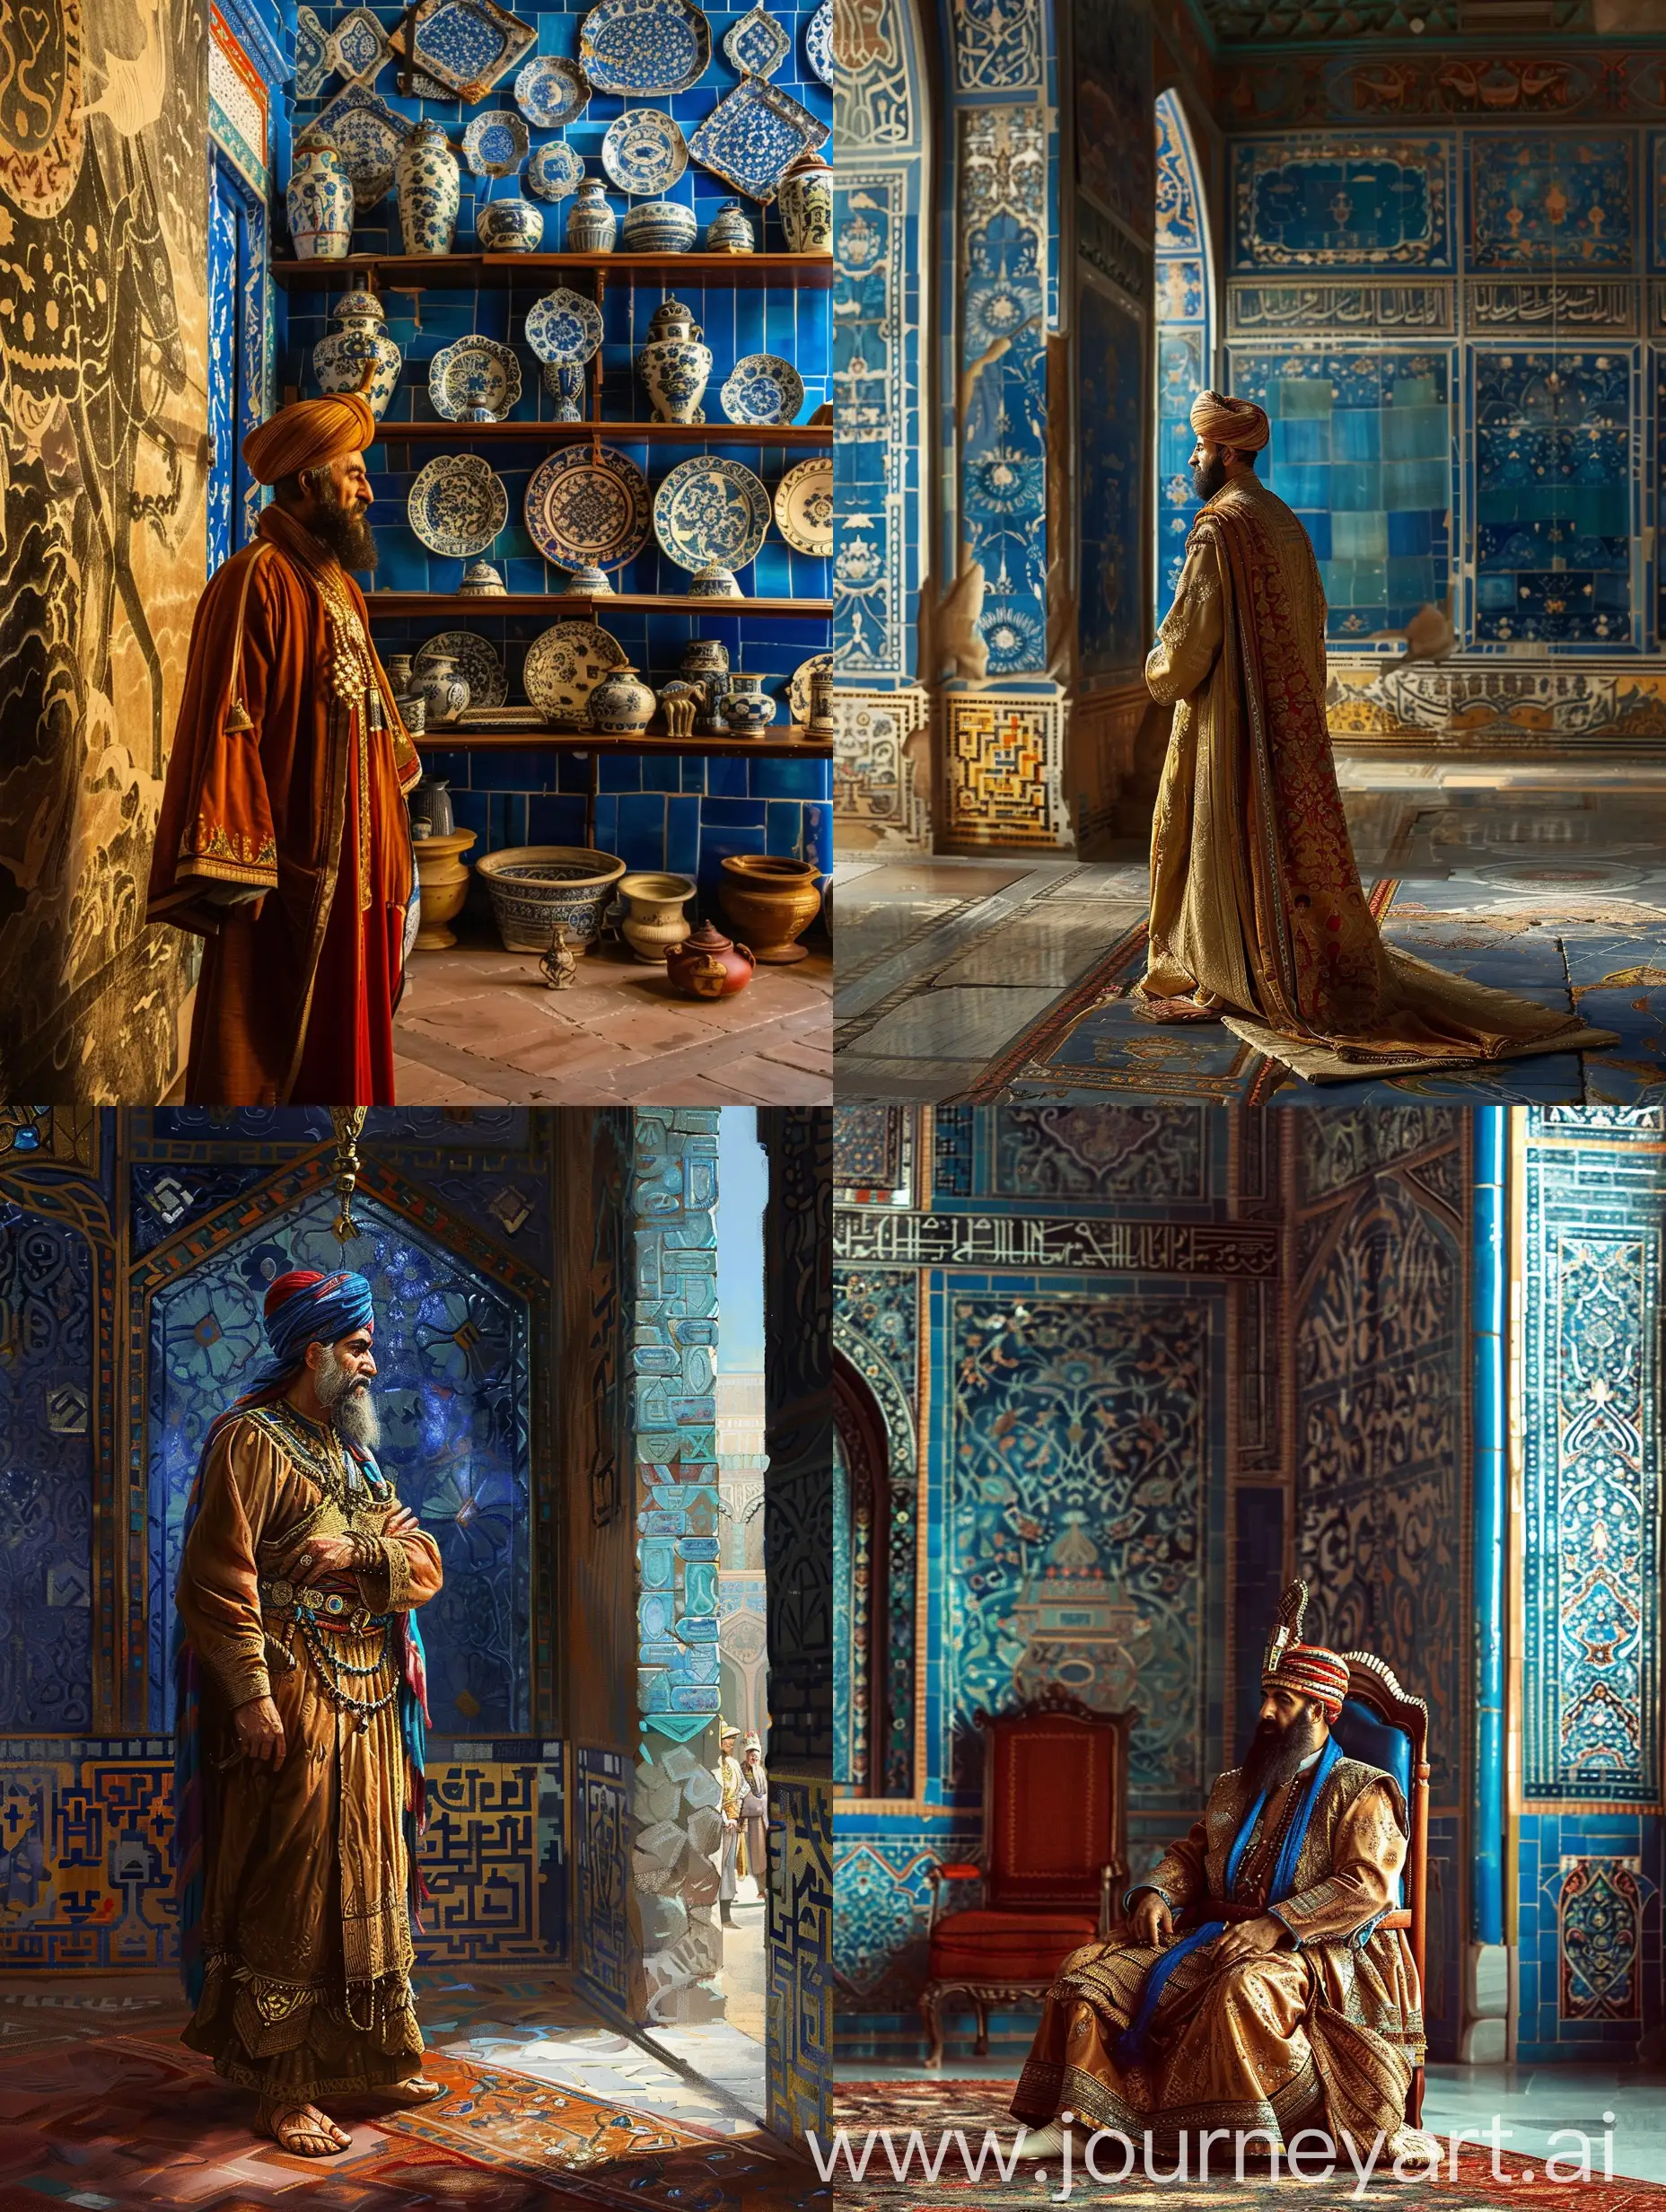 An ancient Persian king in a room with blue porcelain on the walls